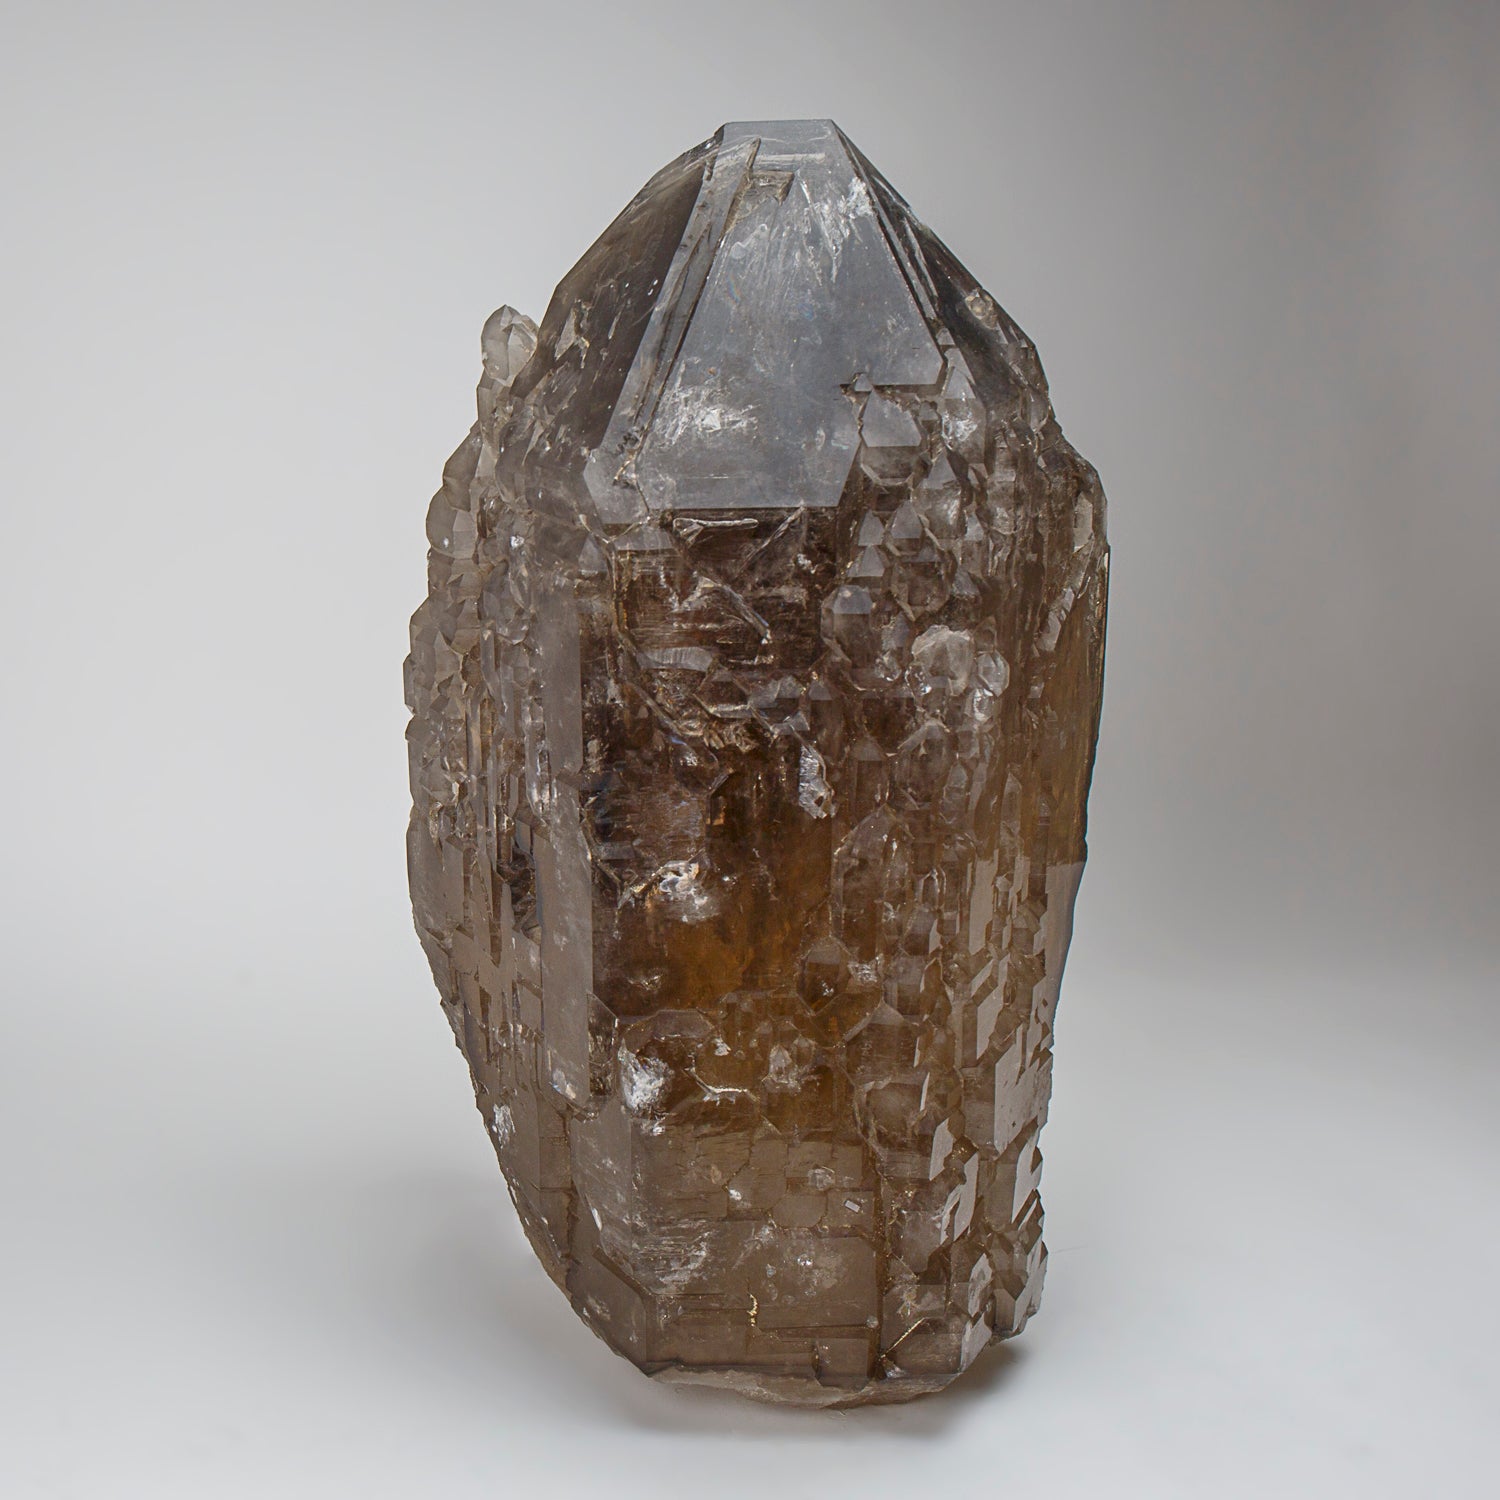 Huge Genuine Cathedral Smoky Quartz Crystal Point from Brazil (81 lbs)